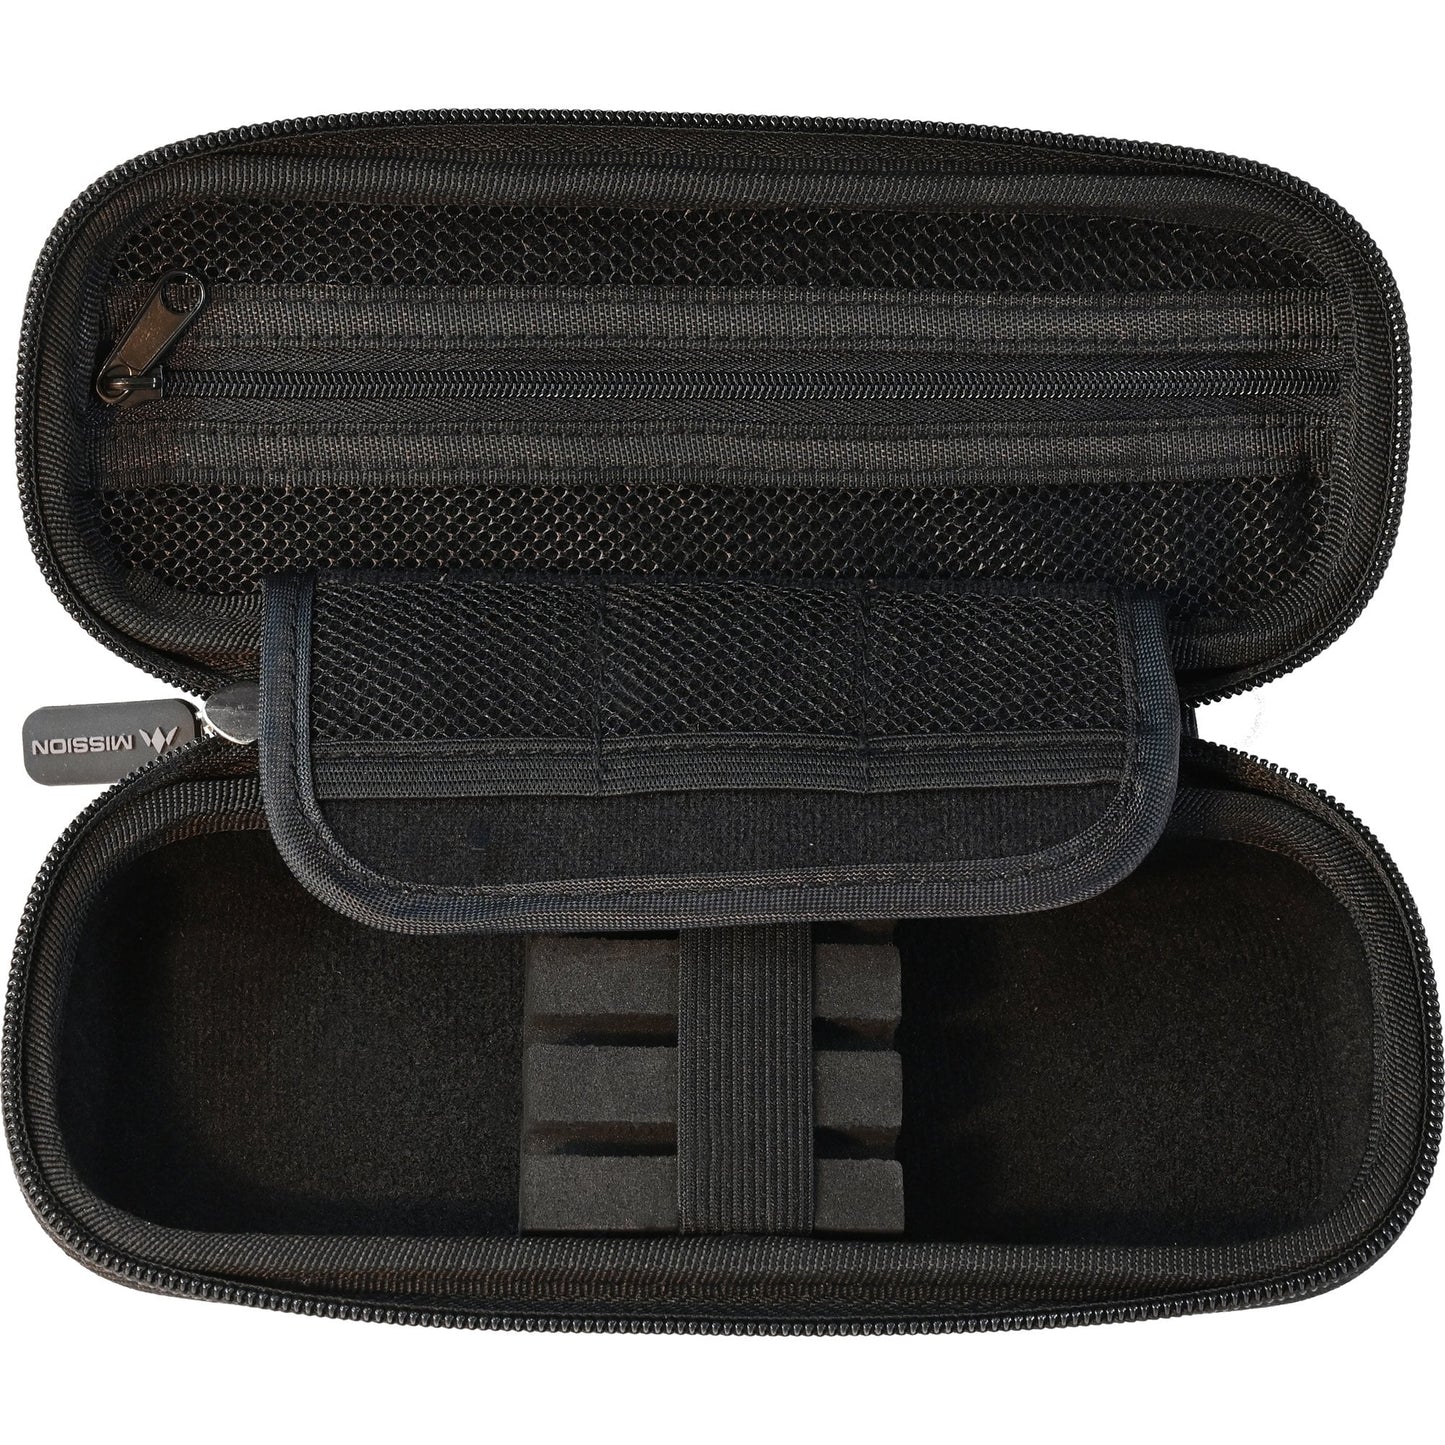 Mission ABS-1 Darts Case - Strong Protection - Metallic